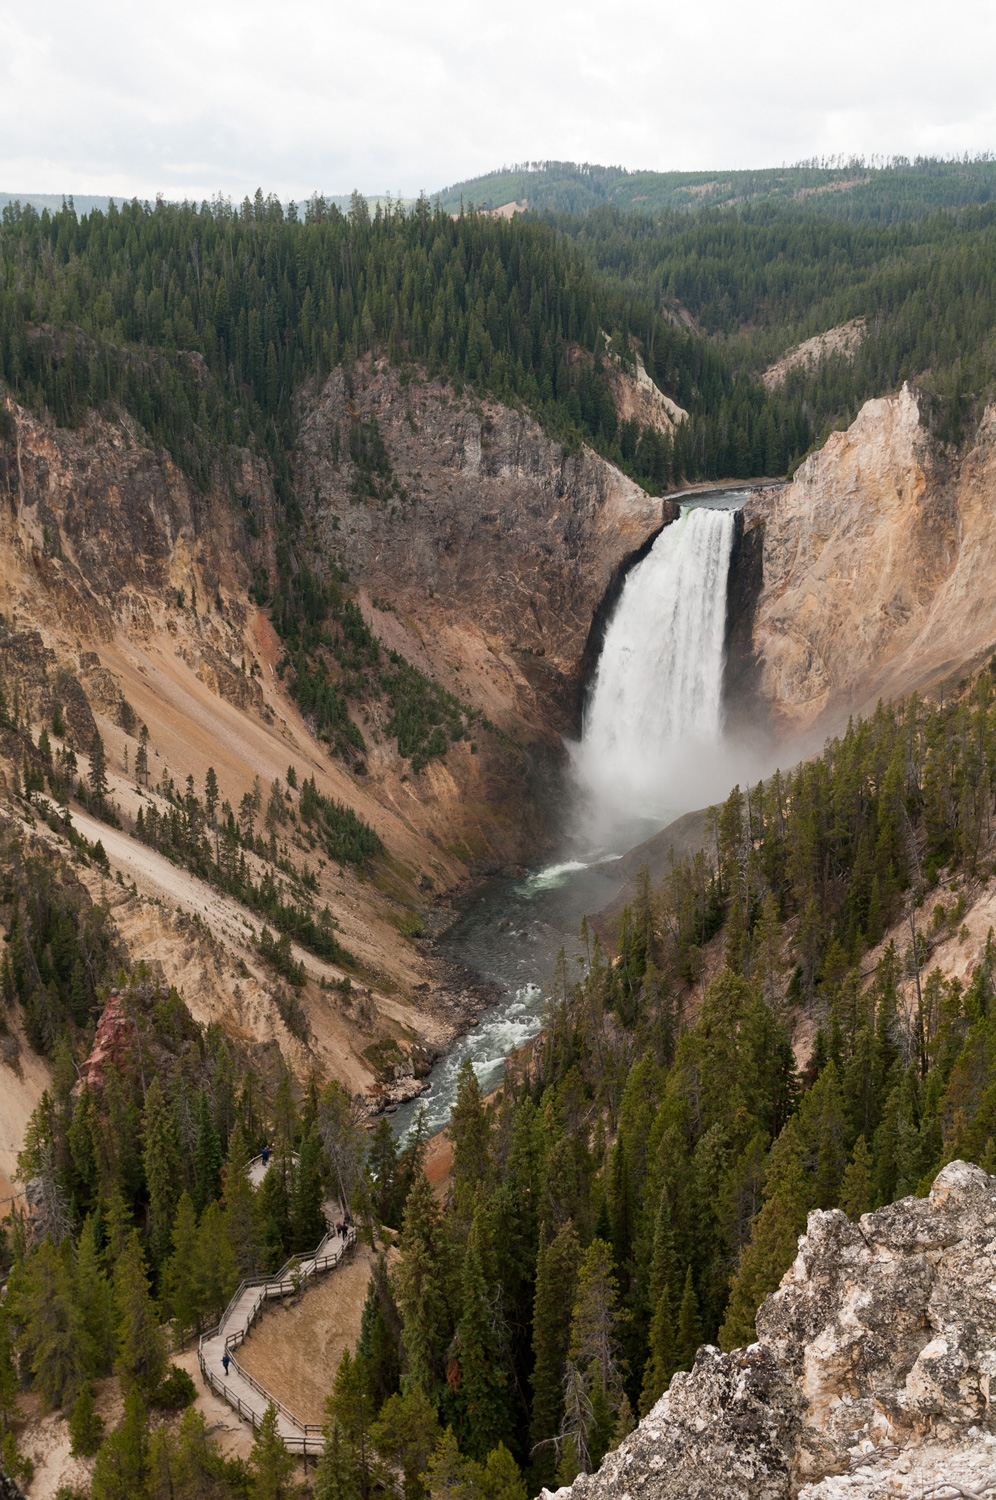 The Water Falls On Yellowstone River